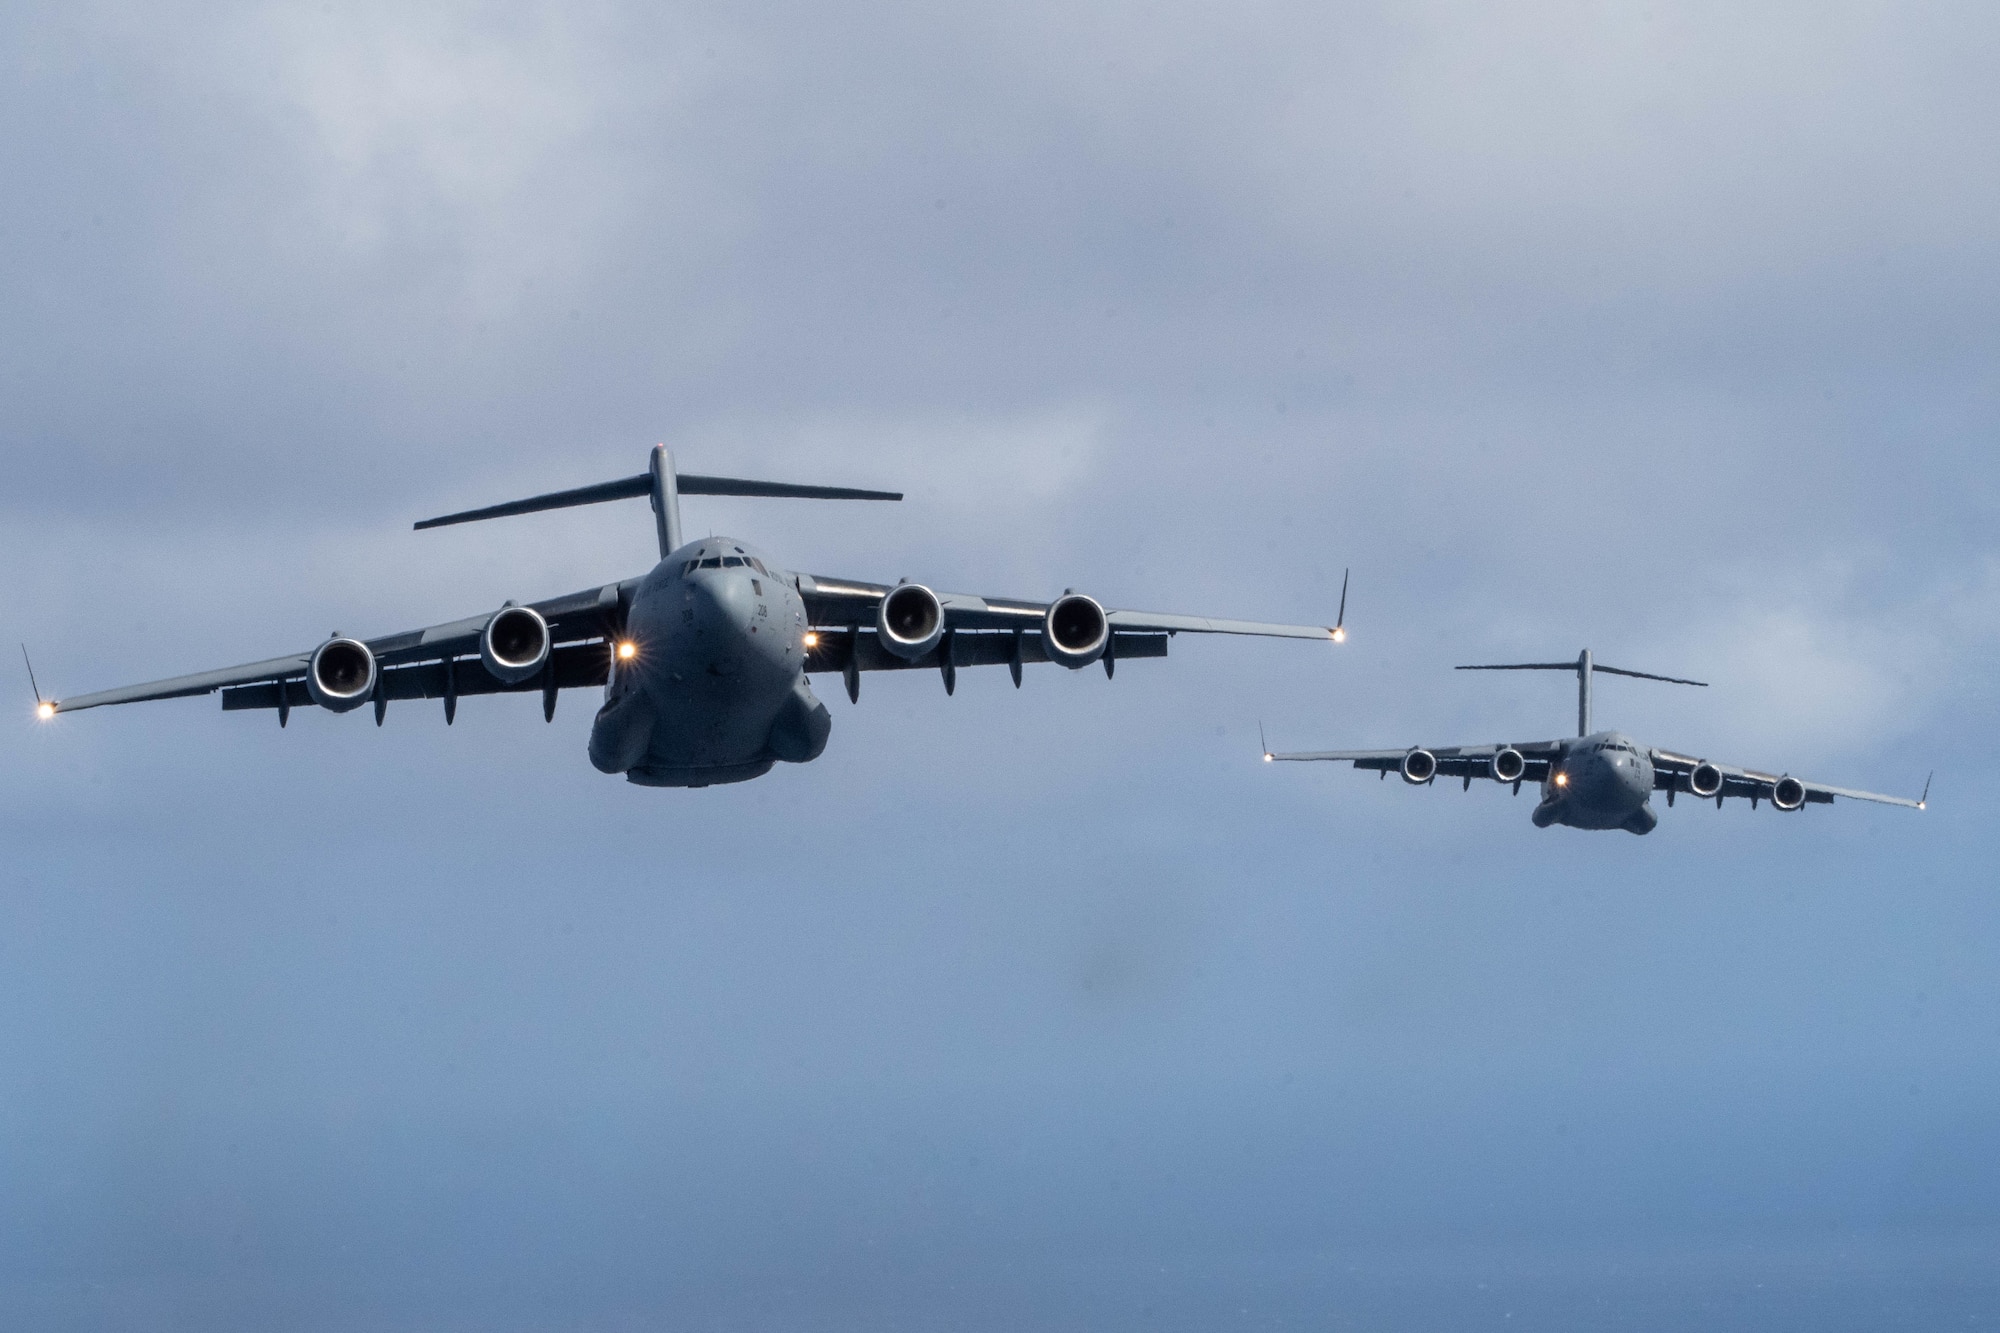 A U.S. Air Force C-17 Globemaster III flies alongside a Royal Australian Air Force C-17 in formation over the Pacific Ocean as part of Exercise Global Dexterity 2022 at Joint Base Pearl Harbor-Hickam, Hawaii, May 4, 2022. The RAAF squadron visited JBPHH to join both active duty and National Guard C-17s for training missions around the Hawaiian Islands to develop tactical airlift and airdrop capabilities. (U.S. Air Force photo by Airman 1st Class Makensie Cooper)